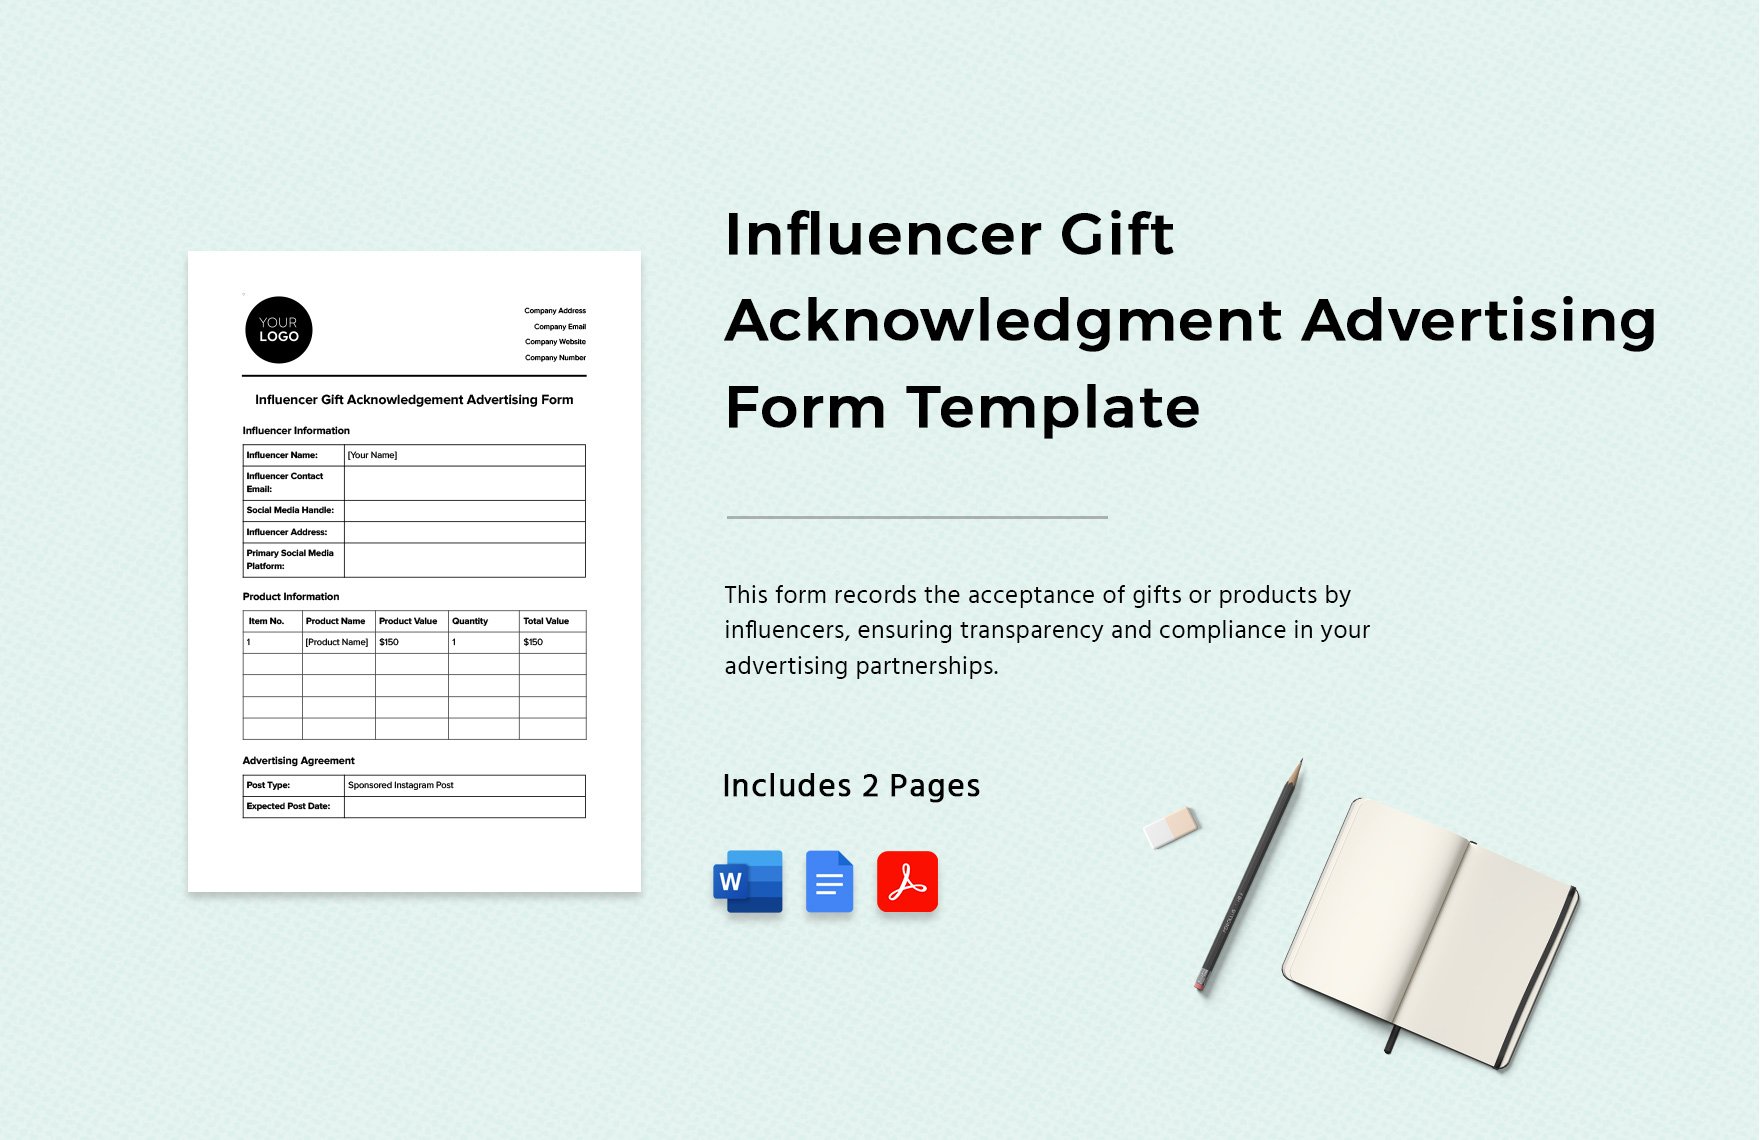 Influencer Gift Acknowledgment Advertising Form Template in Word, Google Docs, PDF